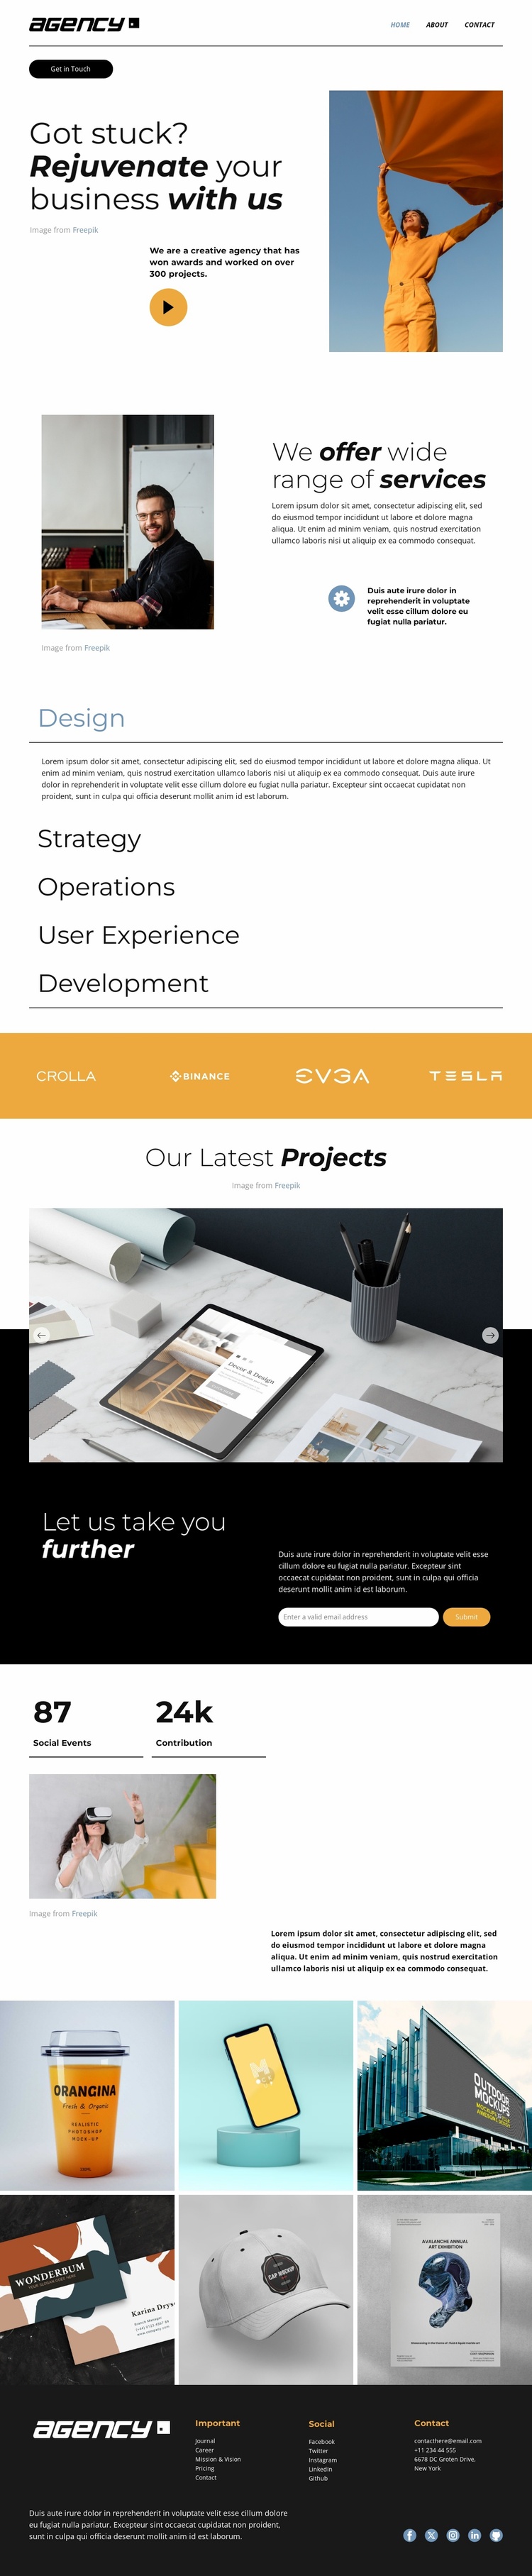 Scale to greater success Website Template